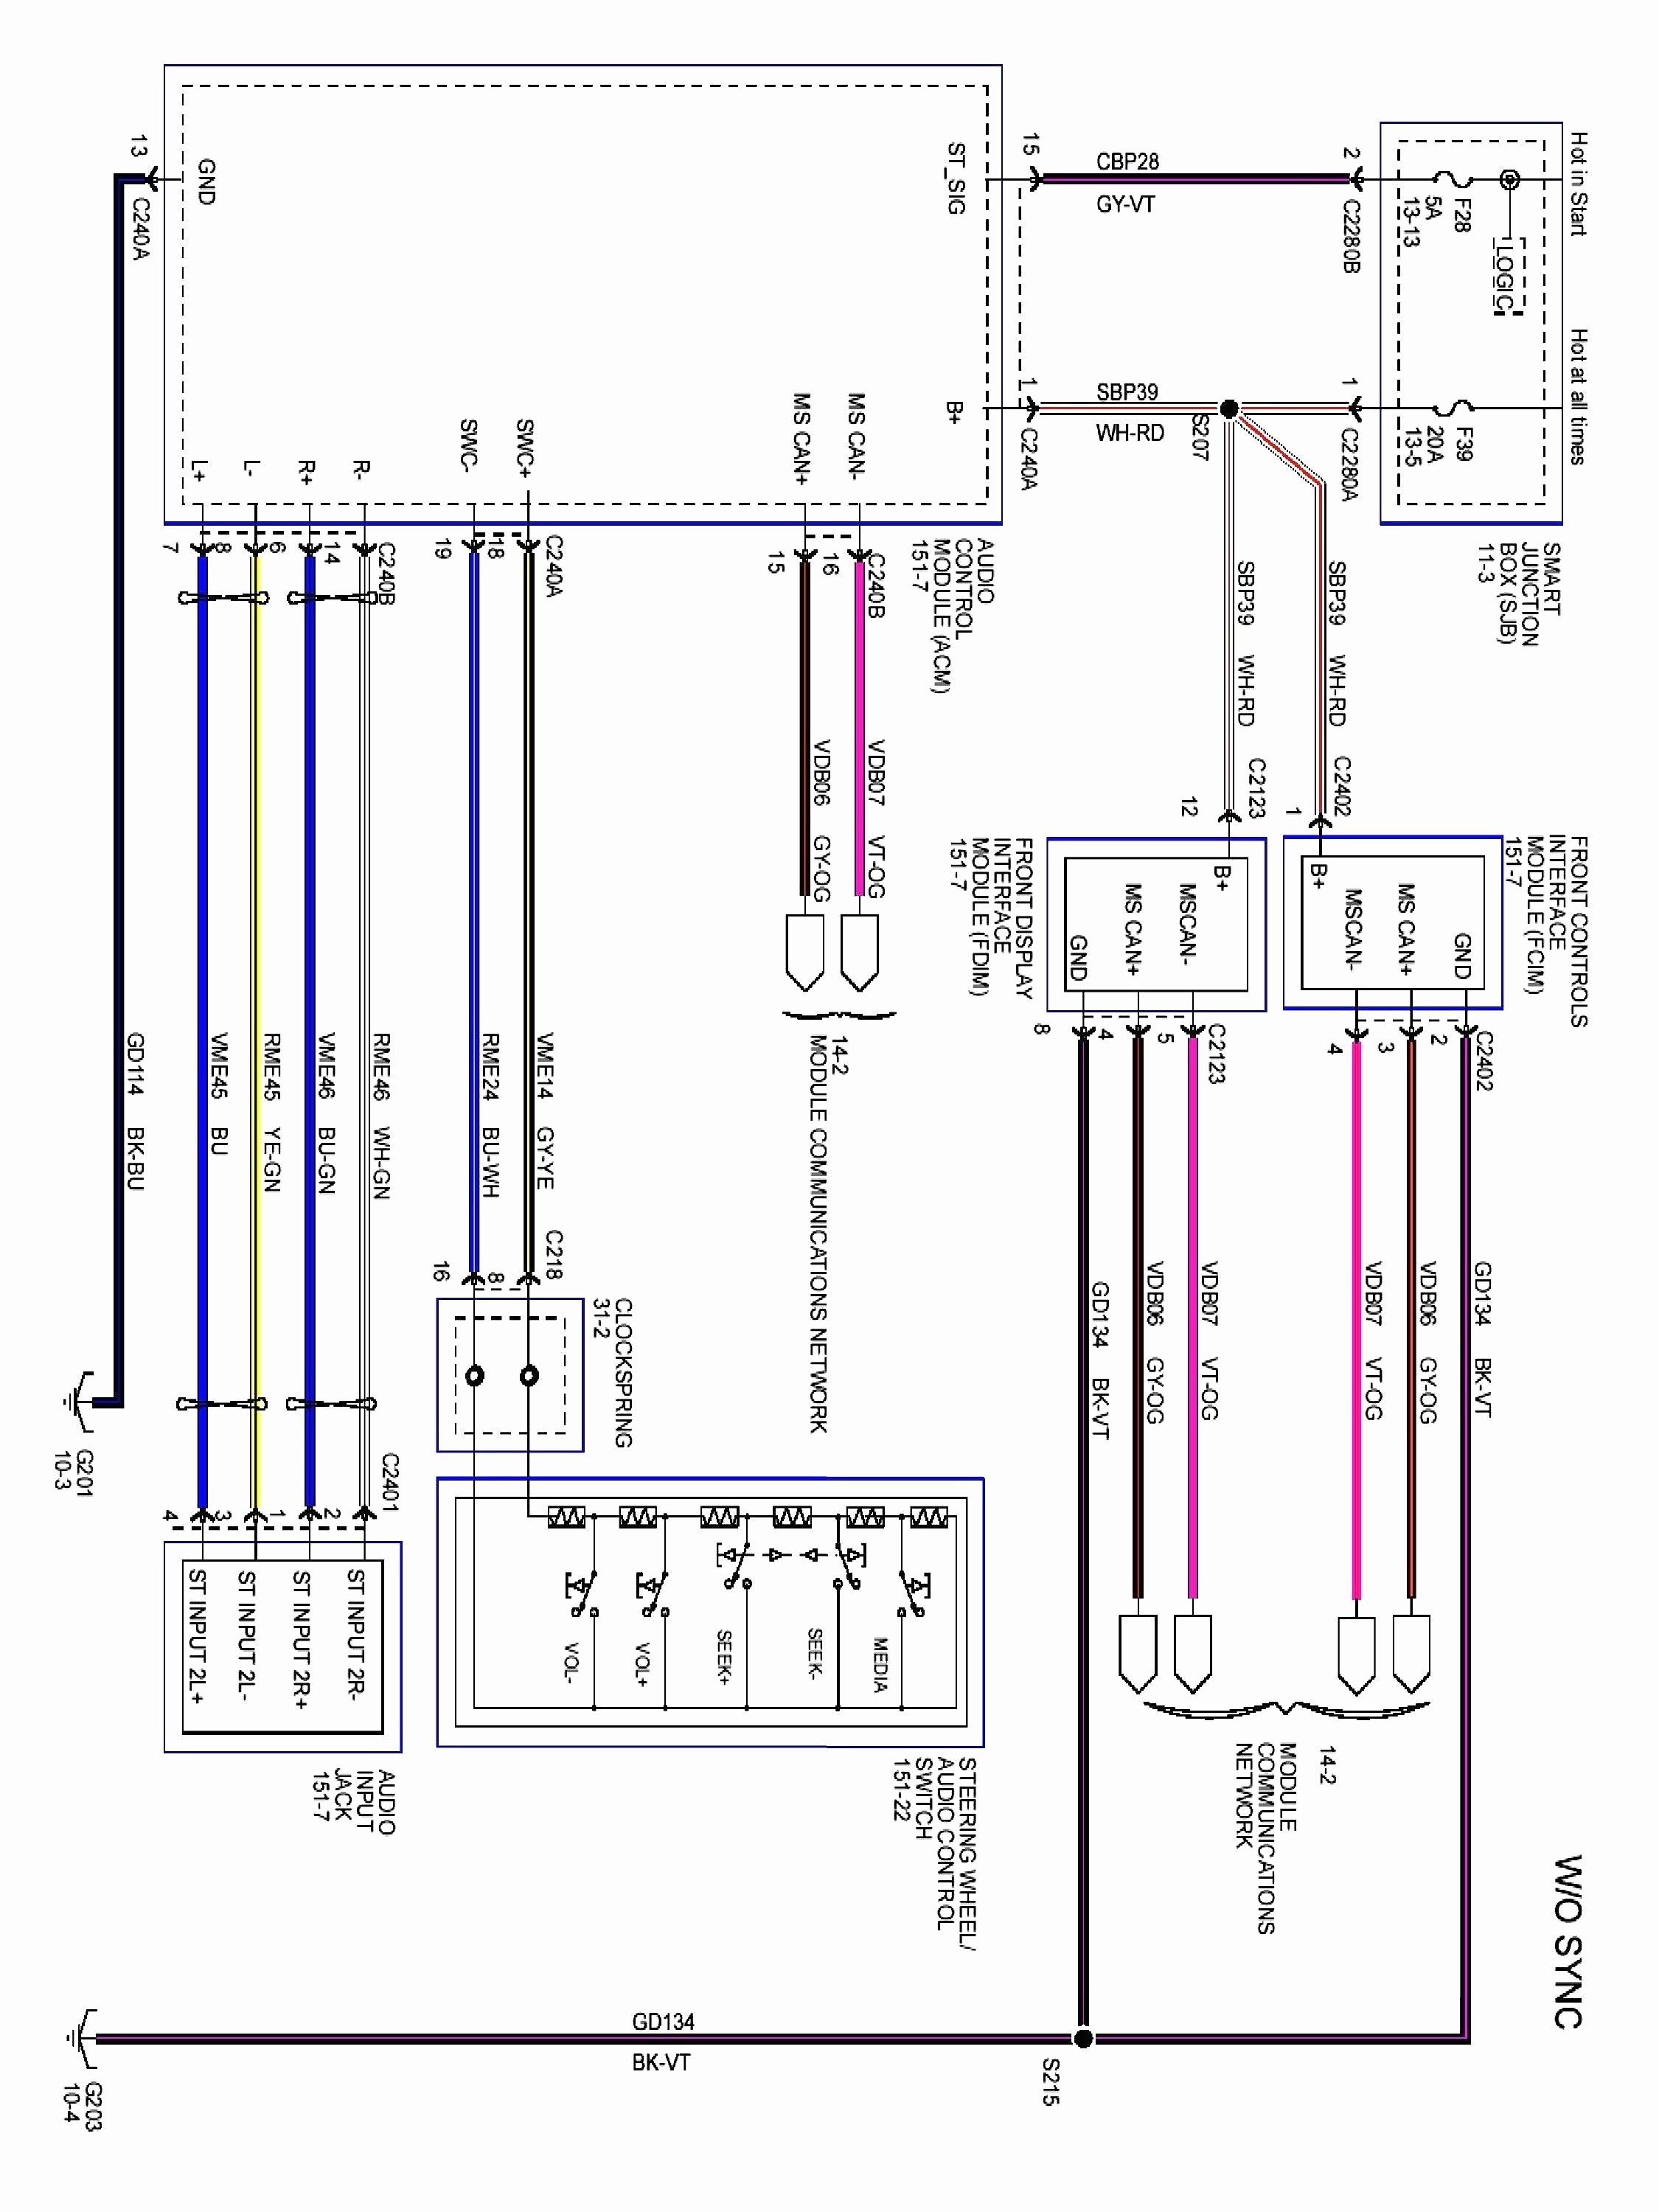 Wiring Diagram for Amplifier Car Stereo Best Amplifier Wiring Car sound Wiring Diagram Sample